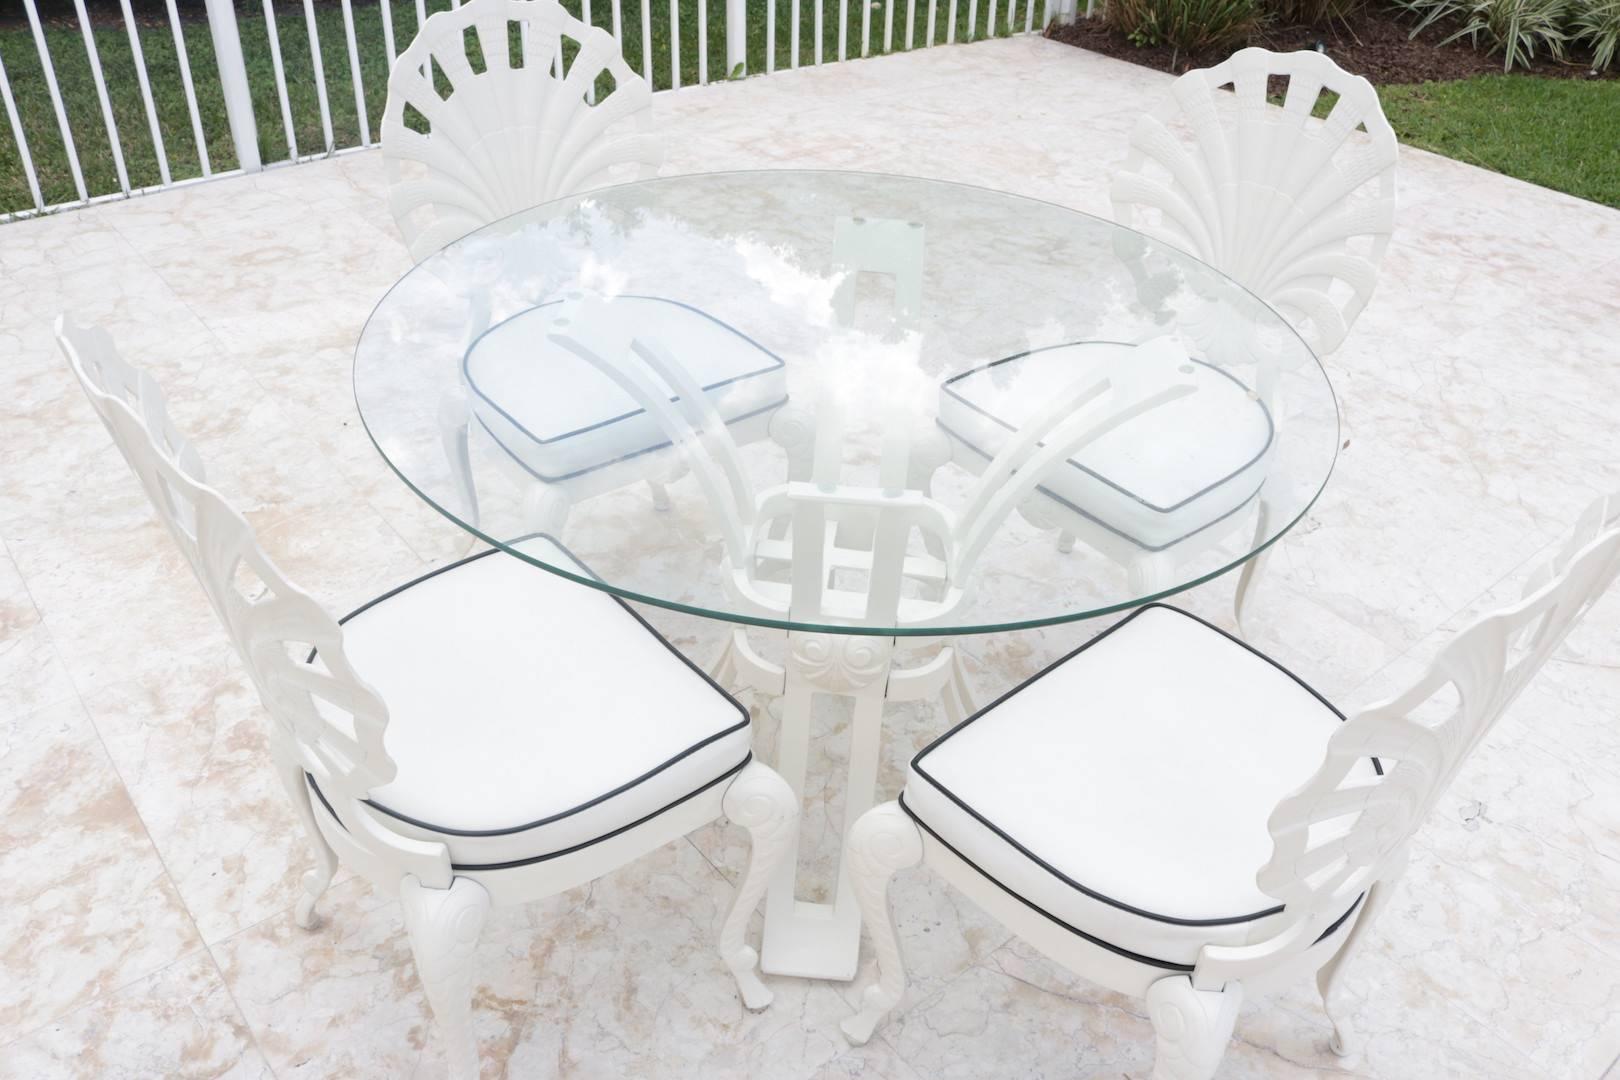 This stylish set of outdoor patio furniture is by Brown Jordan and dates to the 1970s. With its grotto seashell back and cabriolet legs it will make the perfect addition of Hollywood Regency glamour to your home. The pieces are powder coated in